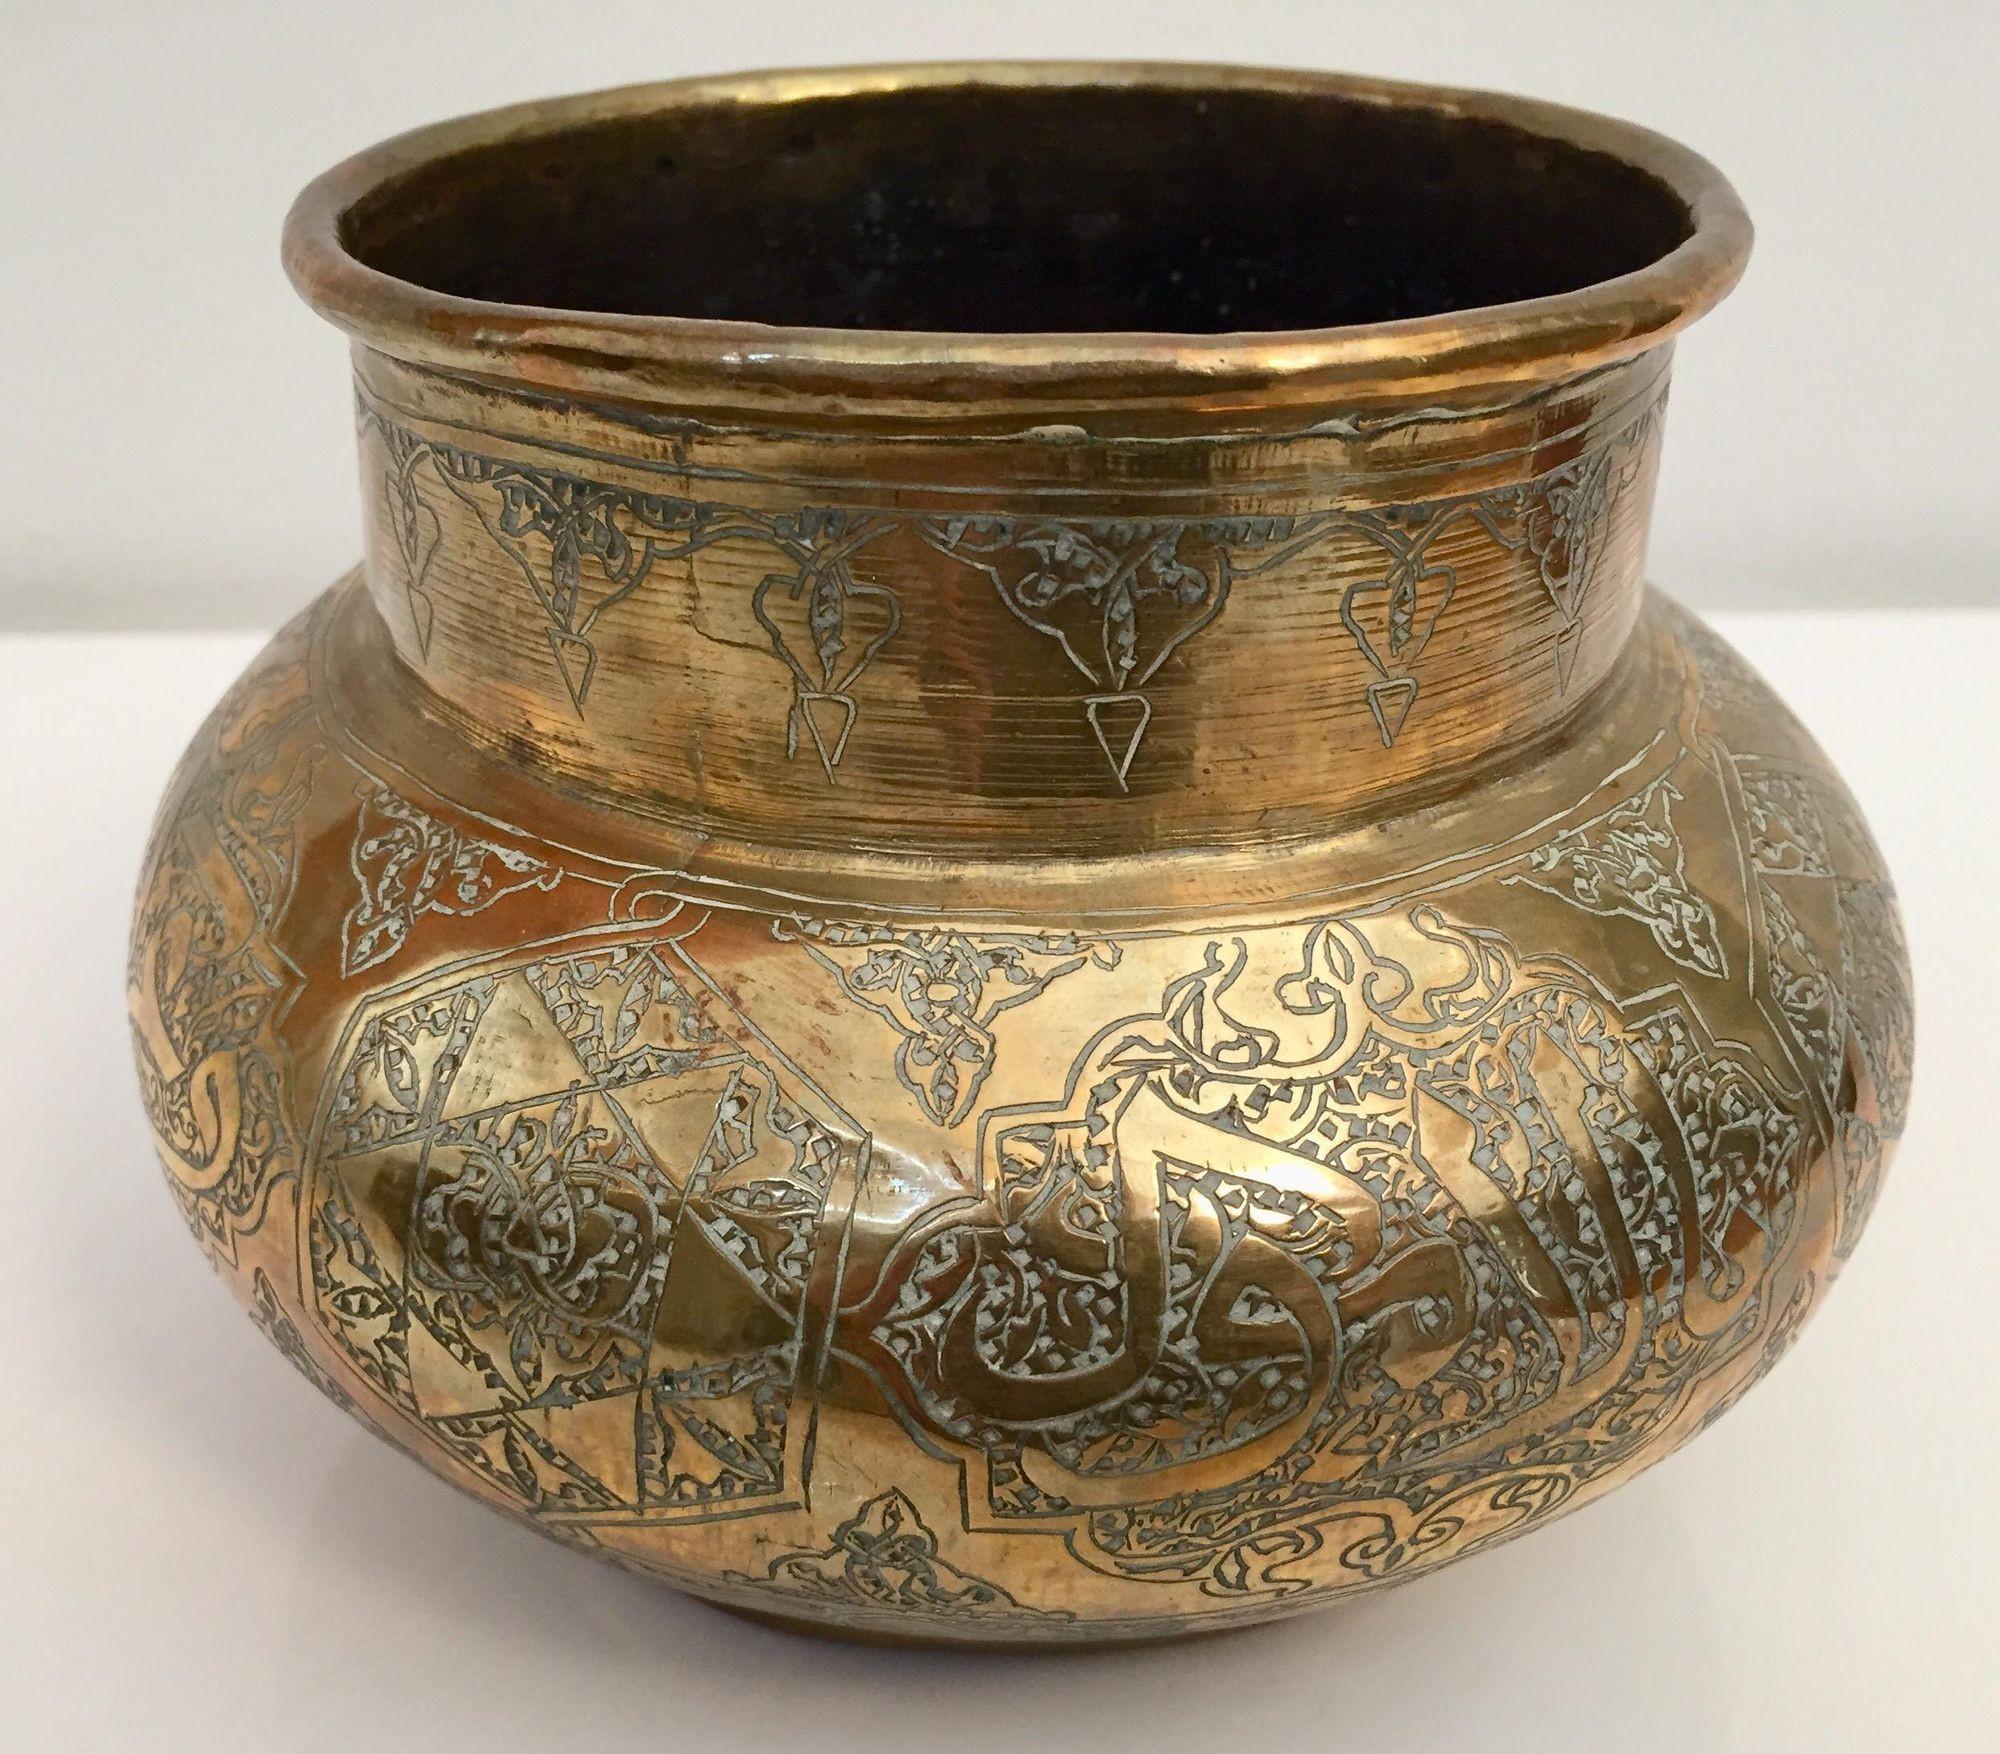 20th Century Middle Eastern Hand-Etched Islamic Brass Vase with Calligraphy Writing For Sale